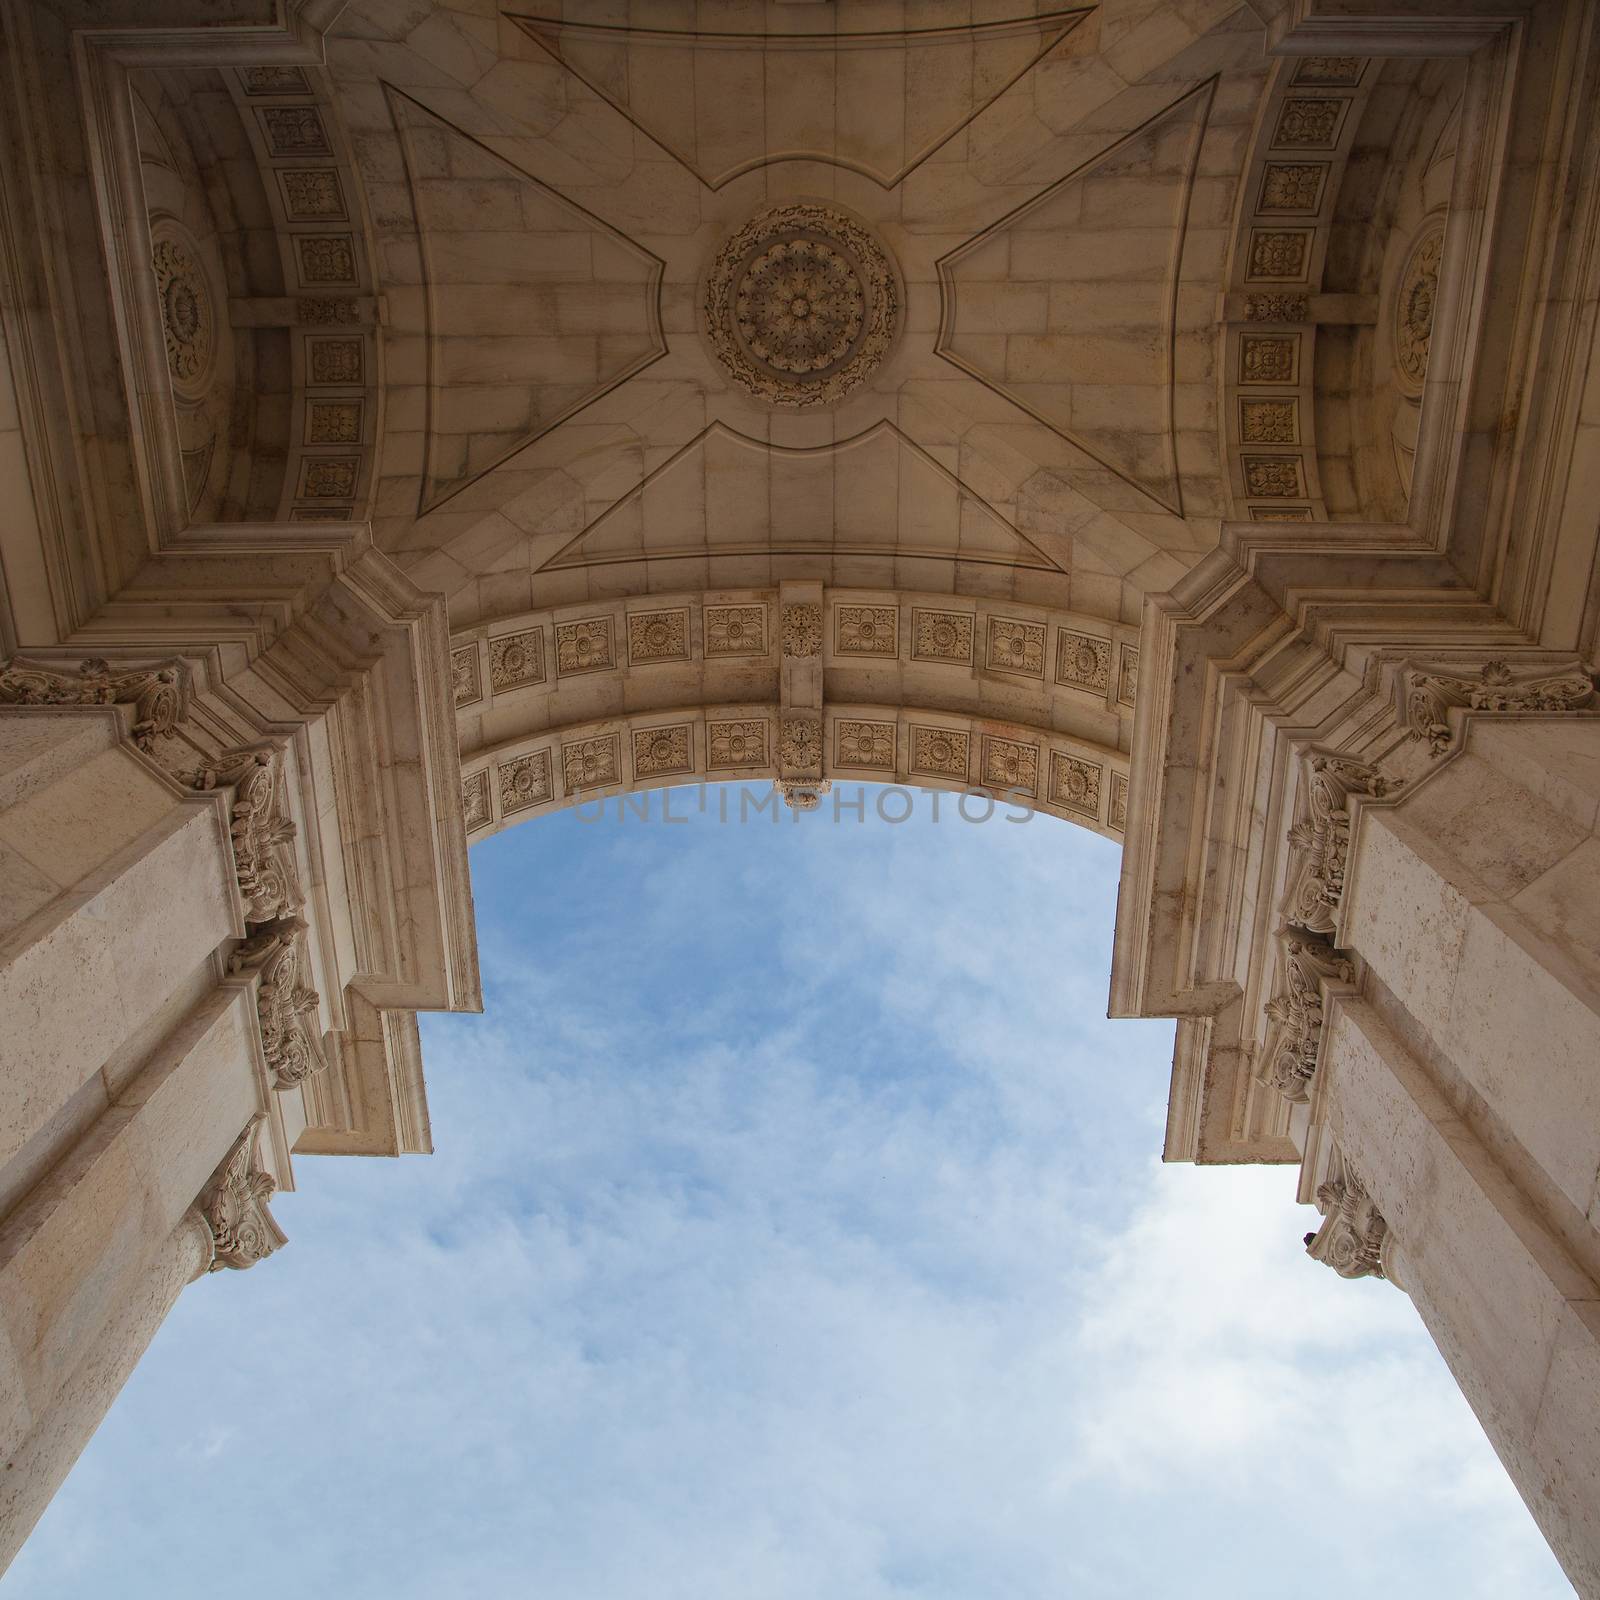 The Rua Augusta Arch in Lisbon. Here are the sculptures made of  by CaptureLight